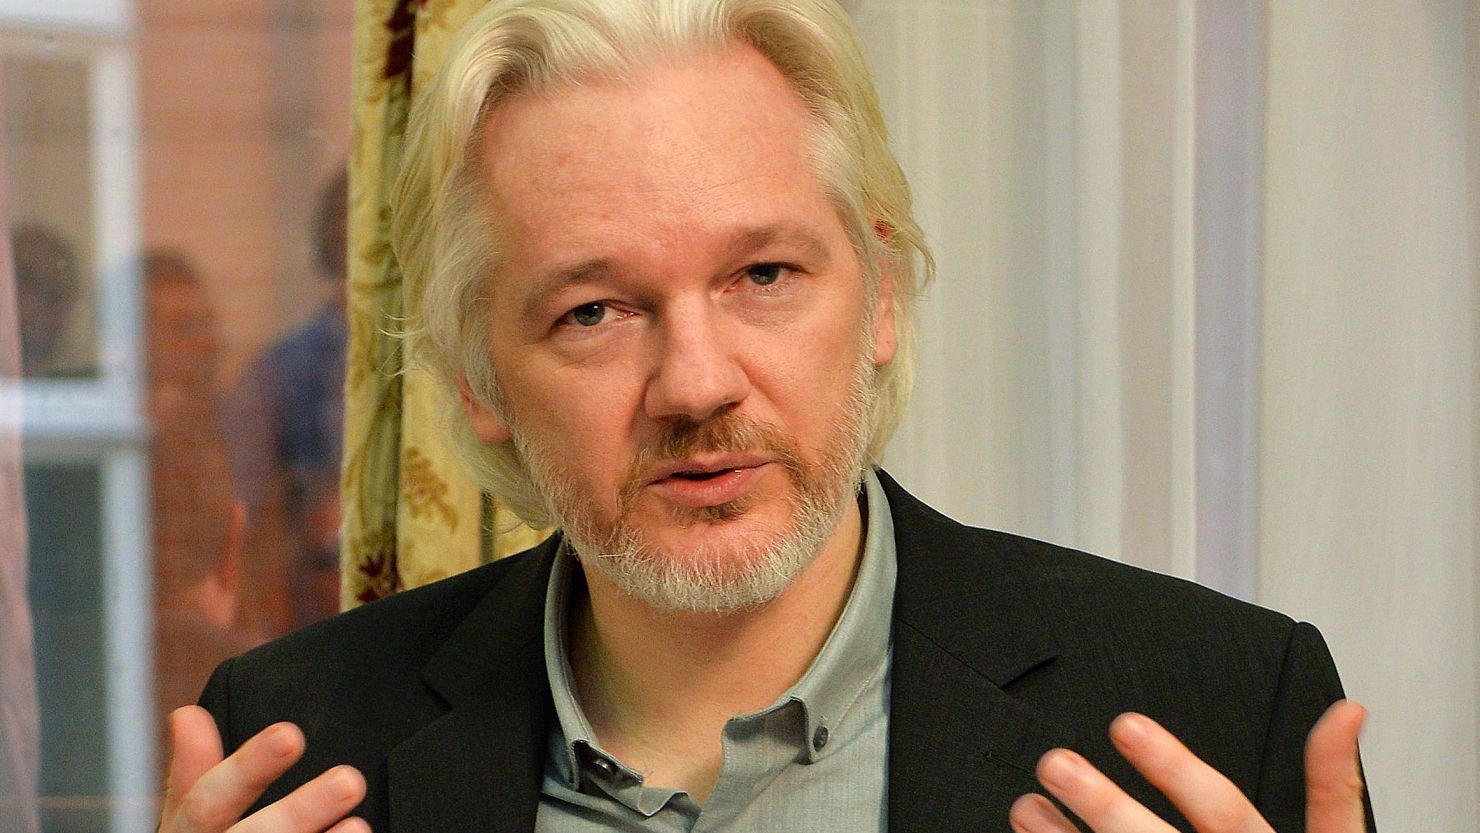 Assange has been holed up in the Ecuadorian Embassy in London since June 2012 to avoid extradition to Sweden.